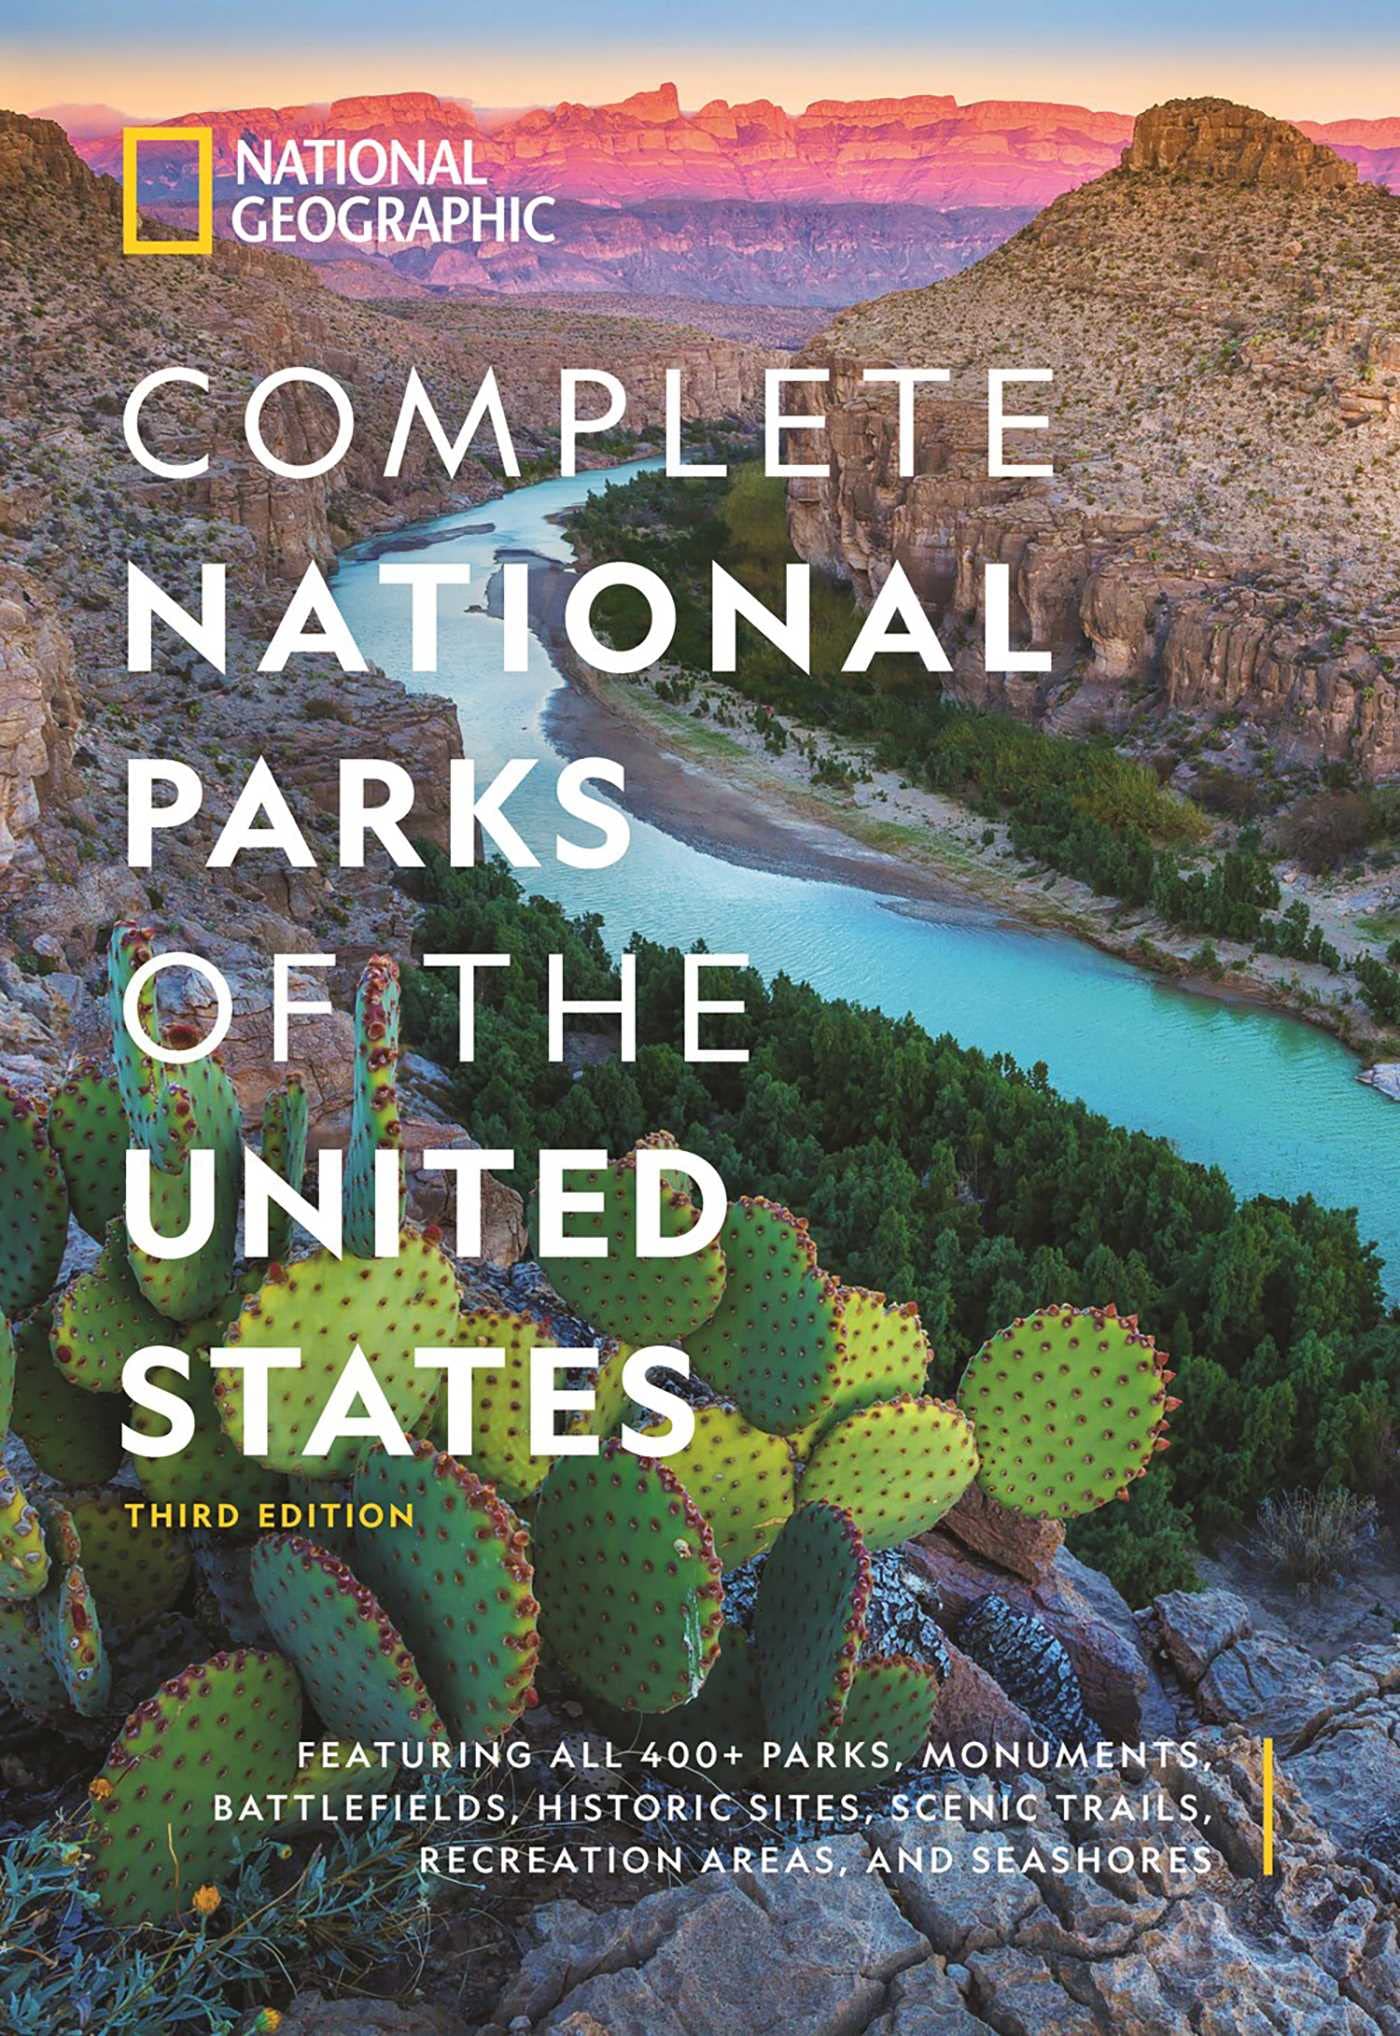 National Geographic Complete National Parks of the United States, 3rd Edition: 400+ Parks, Monuments, Battlefields, Historic Sites, Scenic Trails, Rec by National Geographic